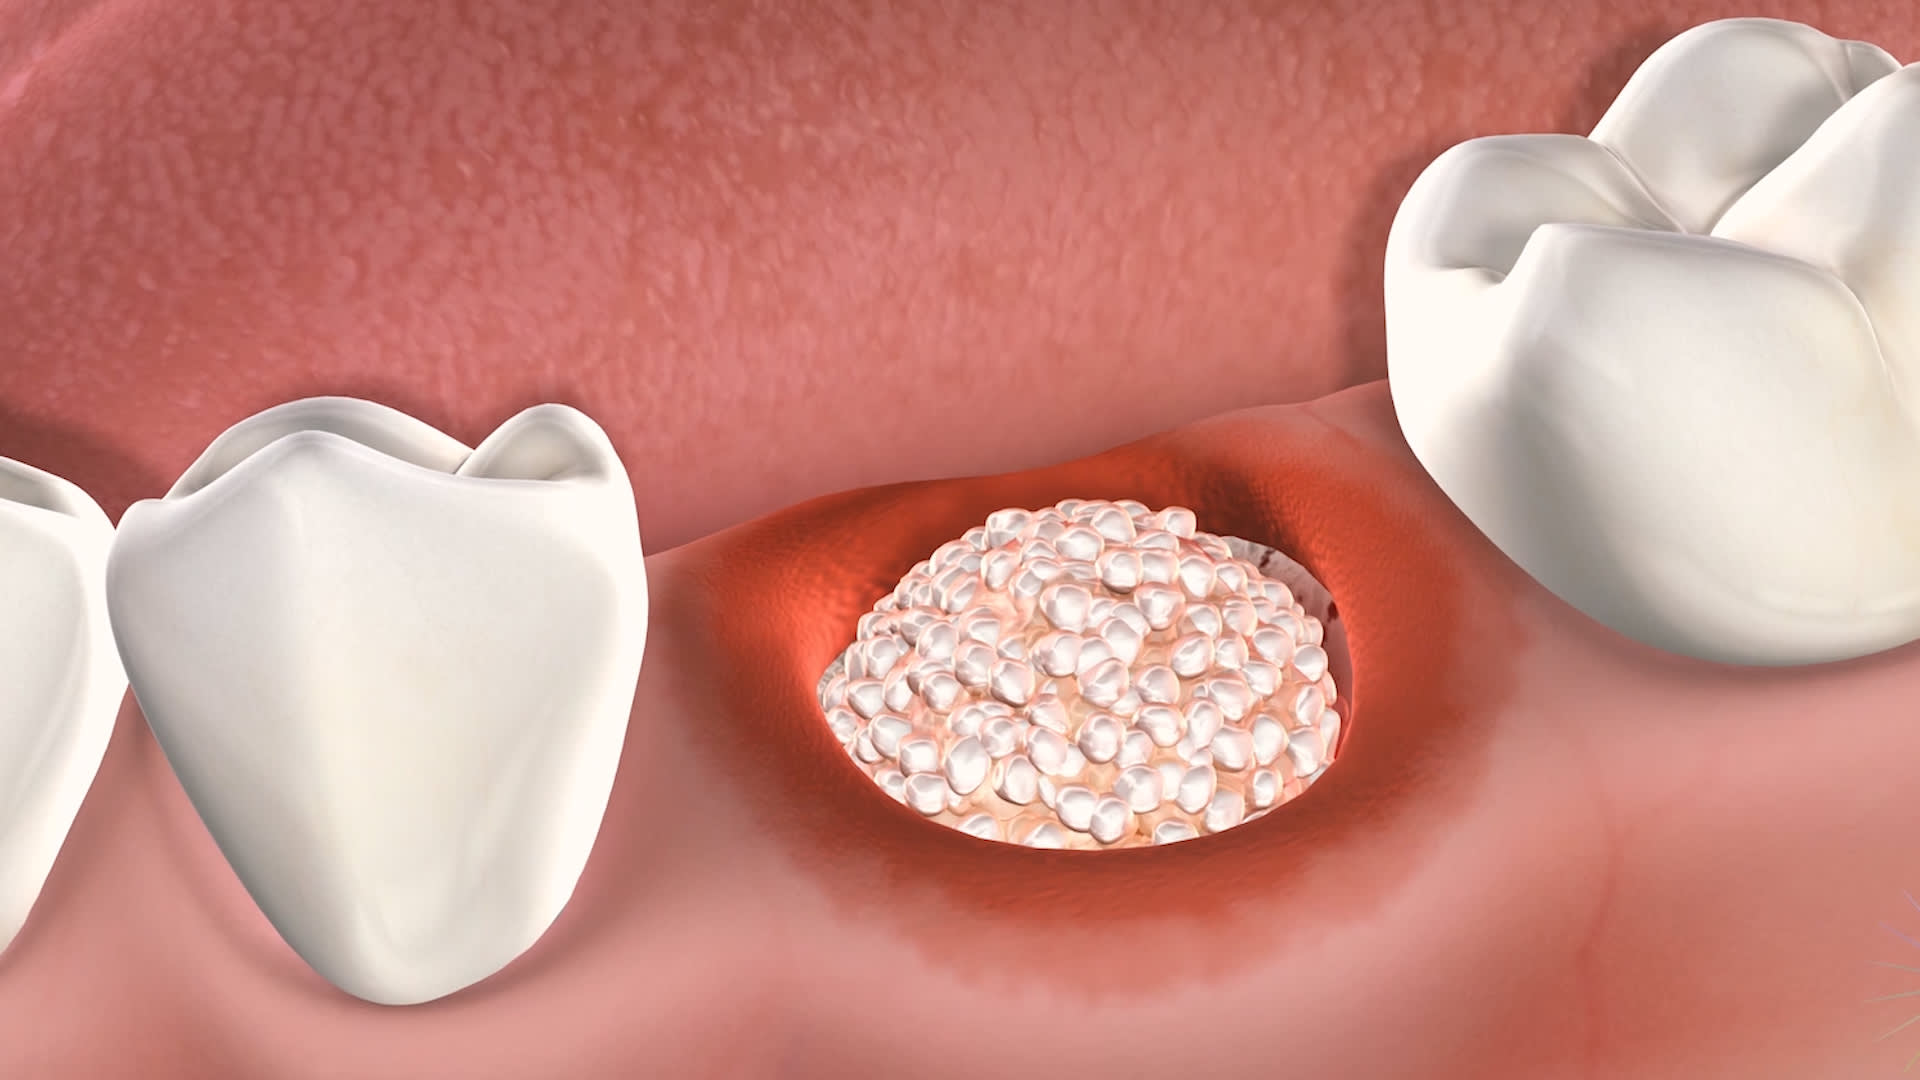 Bone grafting is a great option for patients with insufficient bone for a dental implant